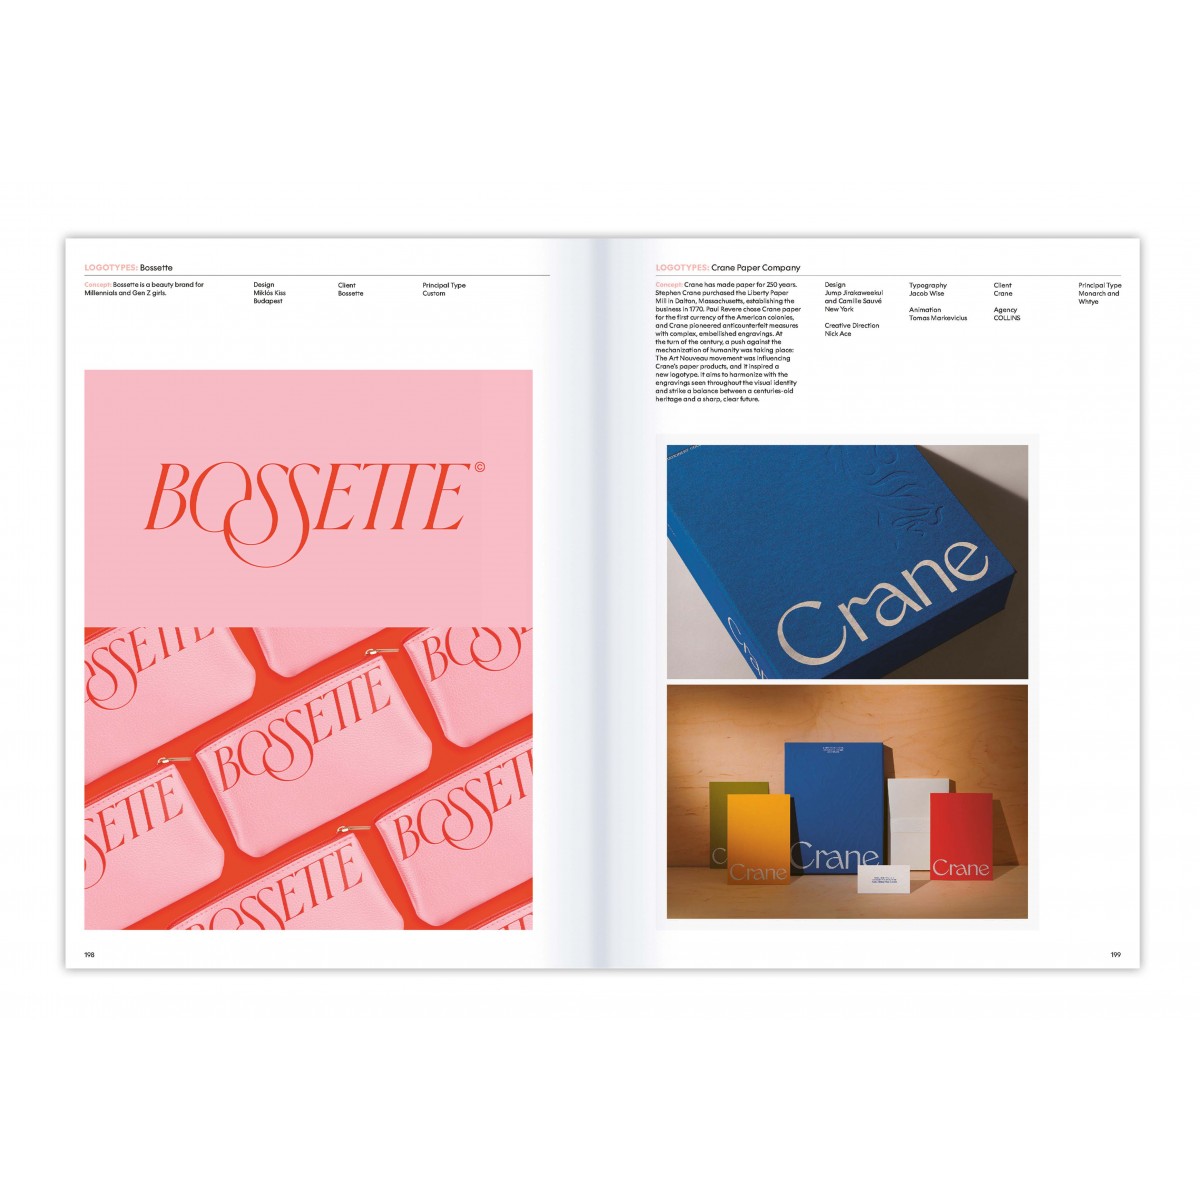 »The World’s Best Typography« –
The 42. Annual of the Type Directors Club 2021